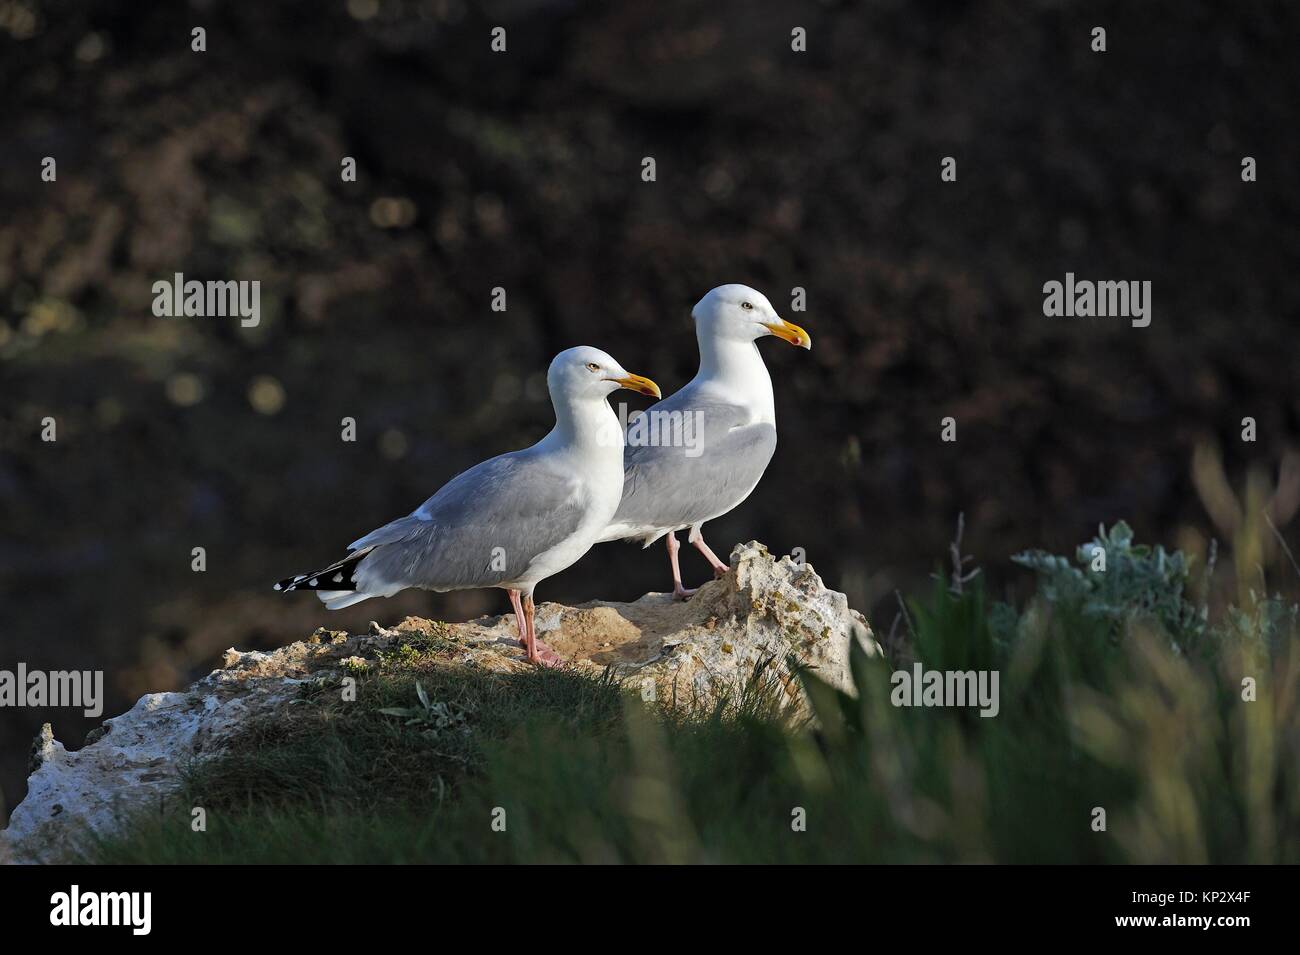 couple of Great black-backed gull in the cliffs of Etretat, Seine Maritime department, Normandie region, France, Europe. Stock Photo